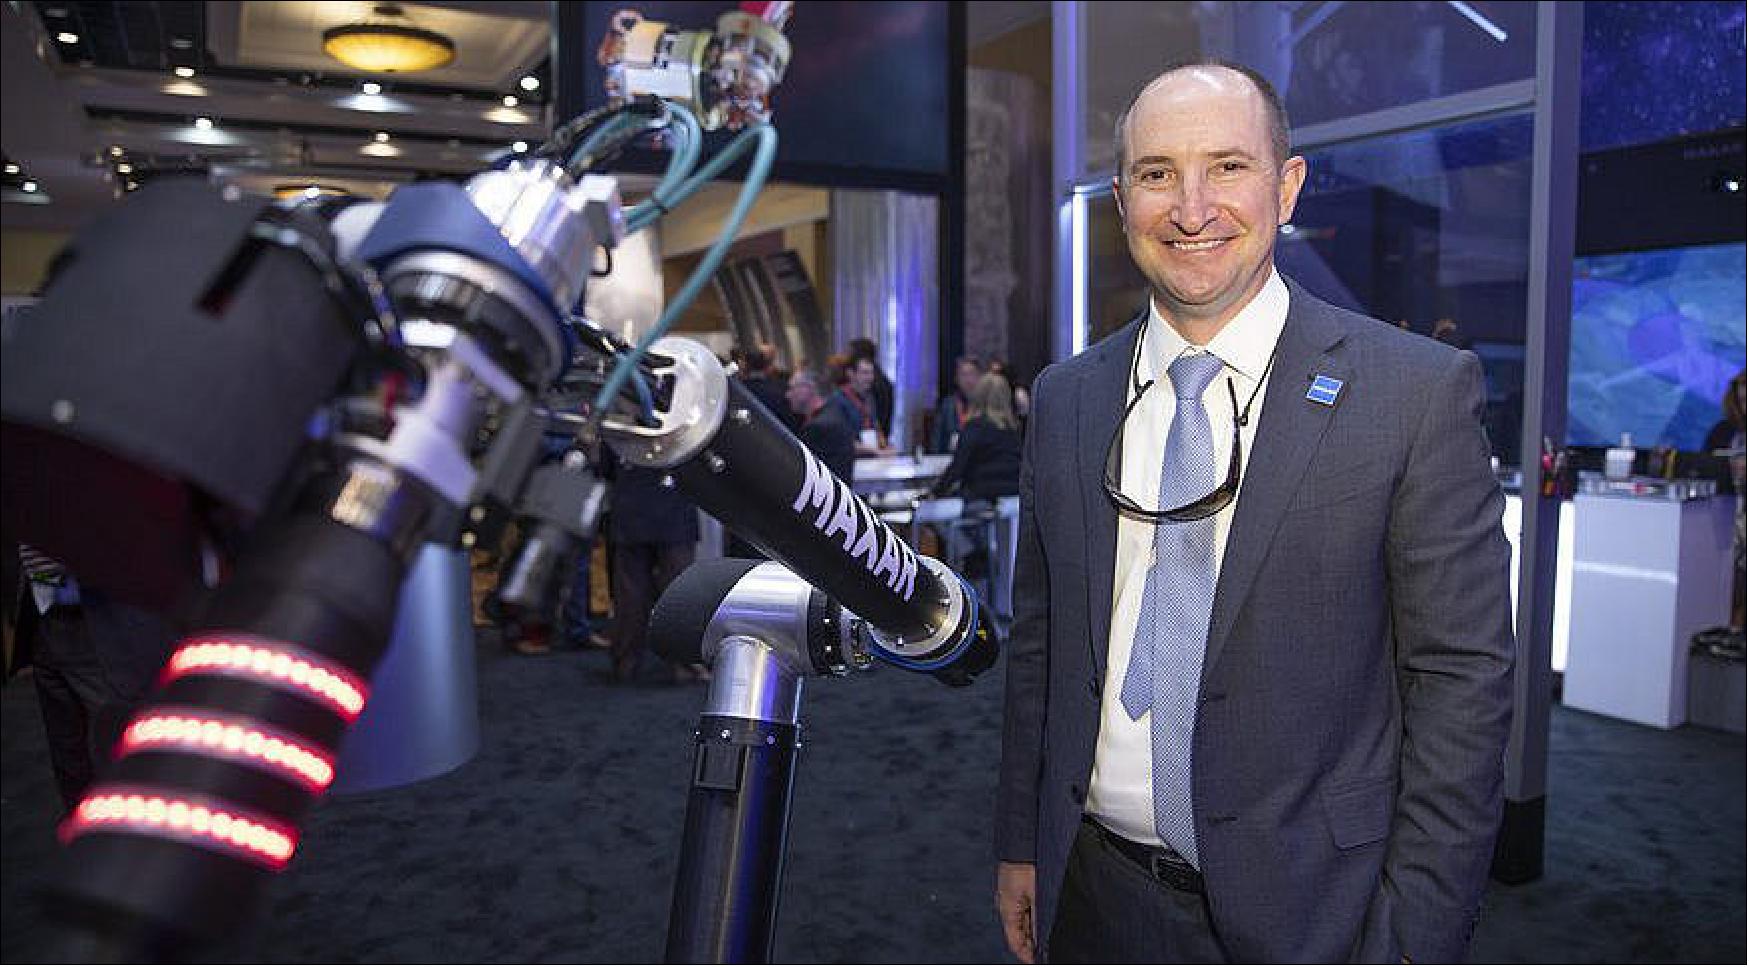 Figure 19: Dan Jablonsky, president and CEO of MAXAR, shown here with a Maxar Space Solutions robotic arm at the 35th Space Symposium at the Broadmoor Hotel in Colorado Springs, CO, April 9, 2019 (photo: Keith Johnson/SpaceNews)